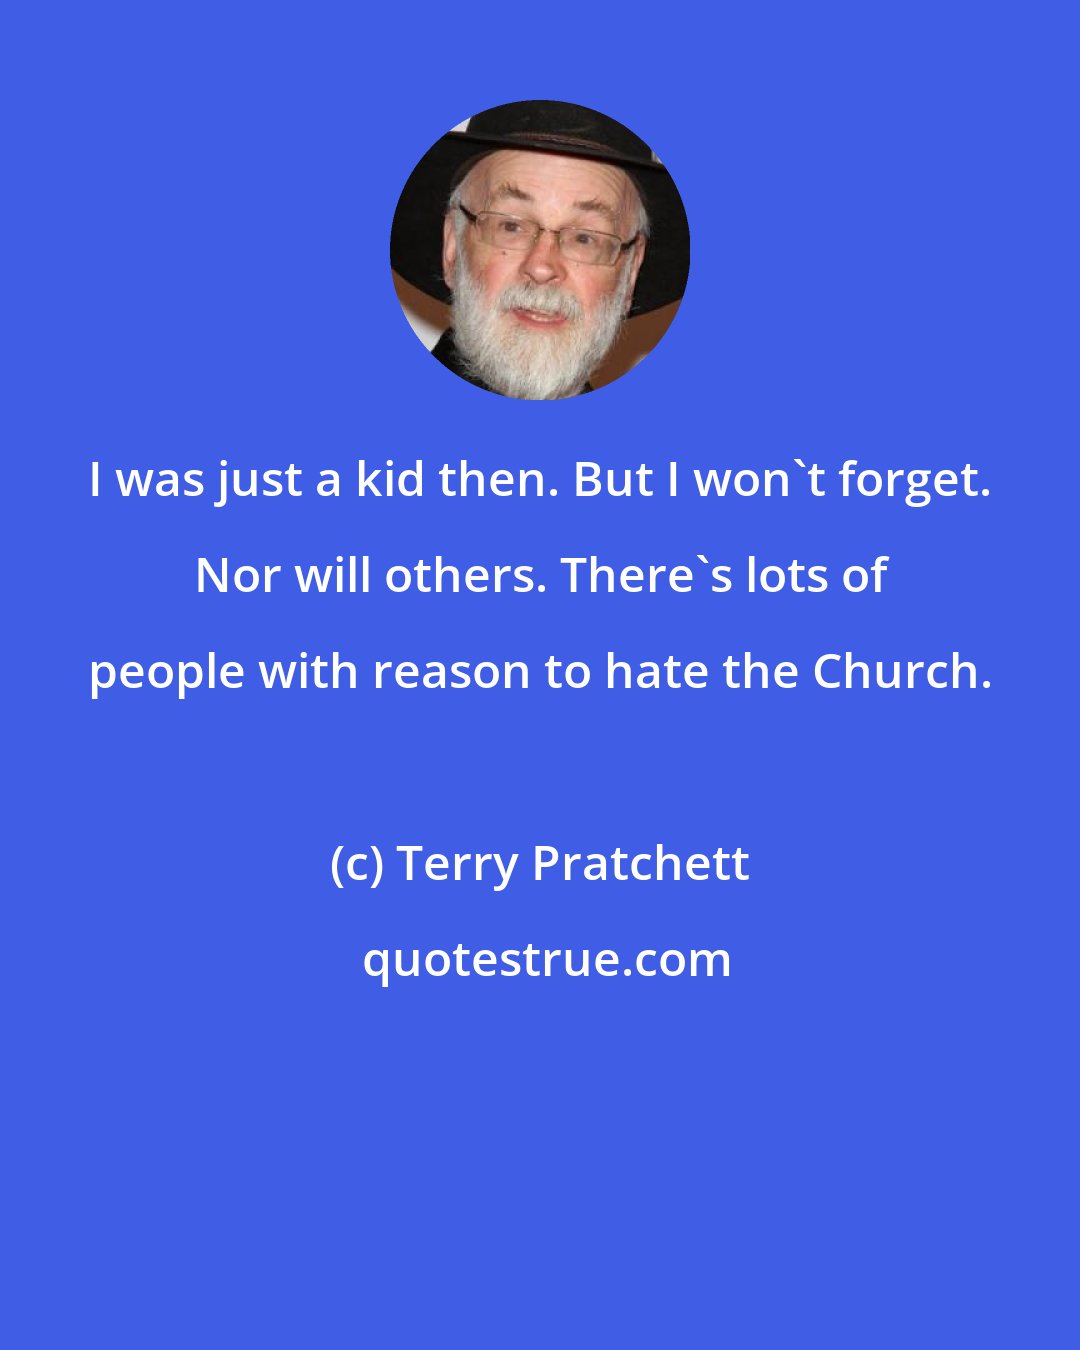 Terry Pratchett: I was just a kid then. But I won't forget. Nor will others. There's lots of people with reason to hate the Church.